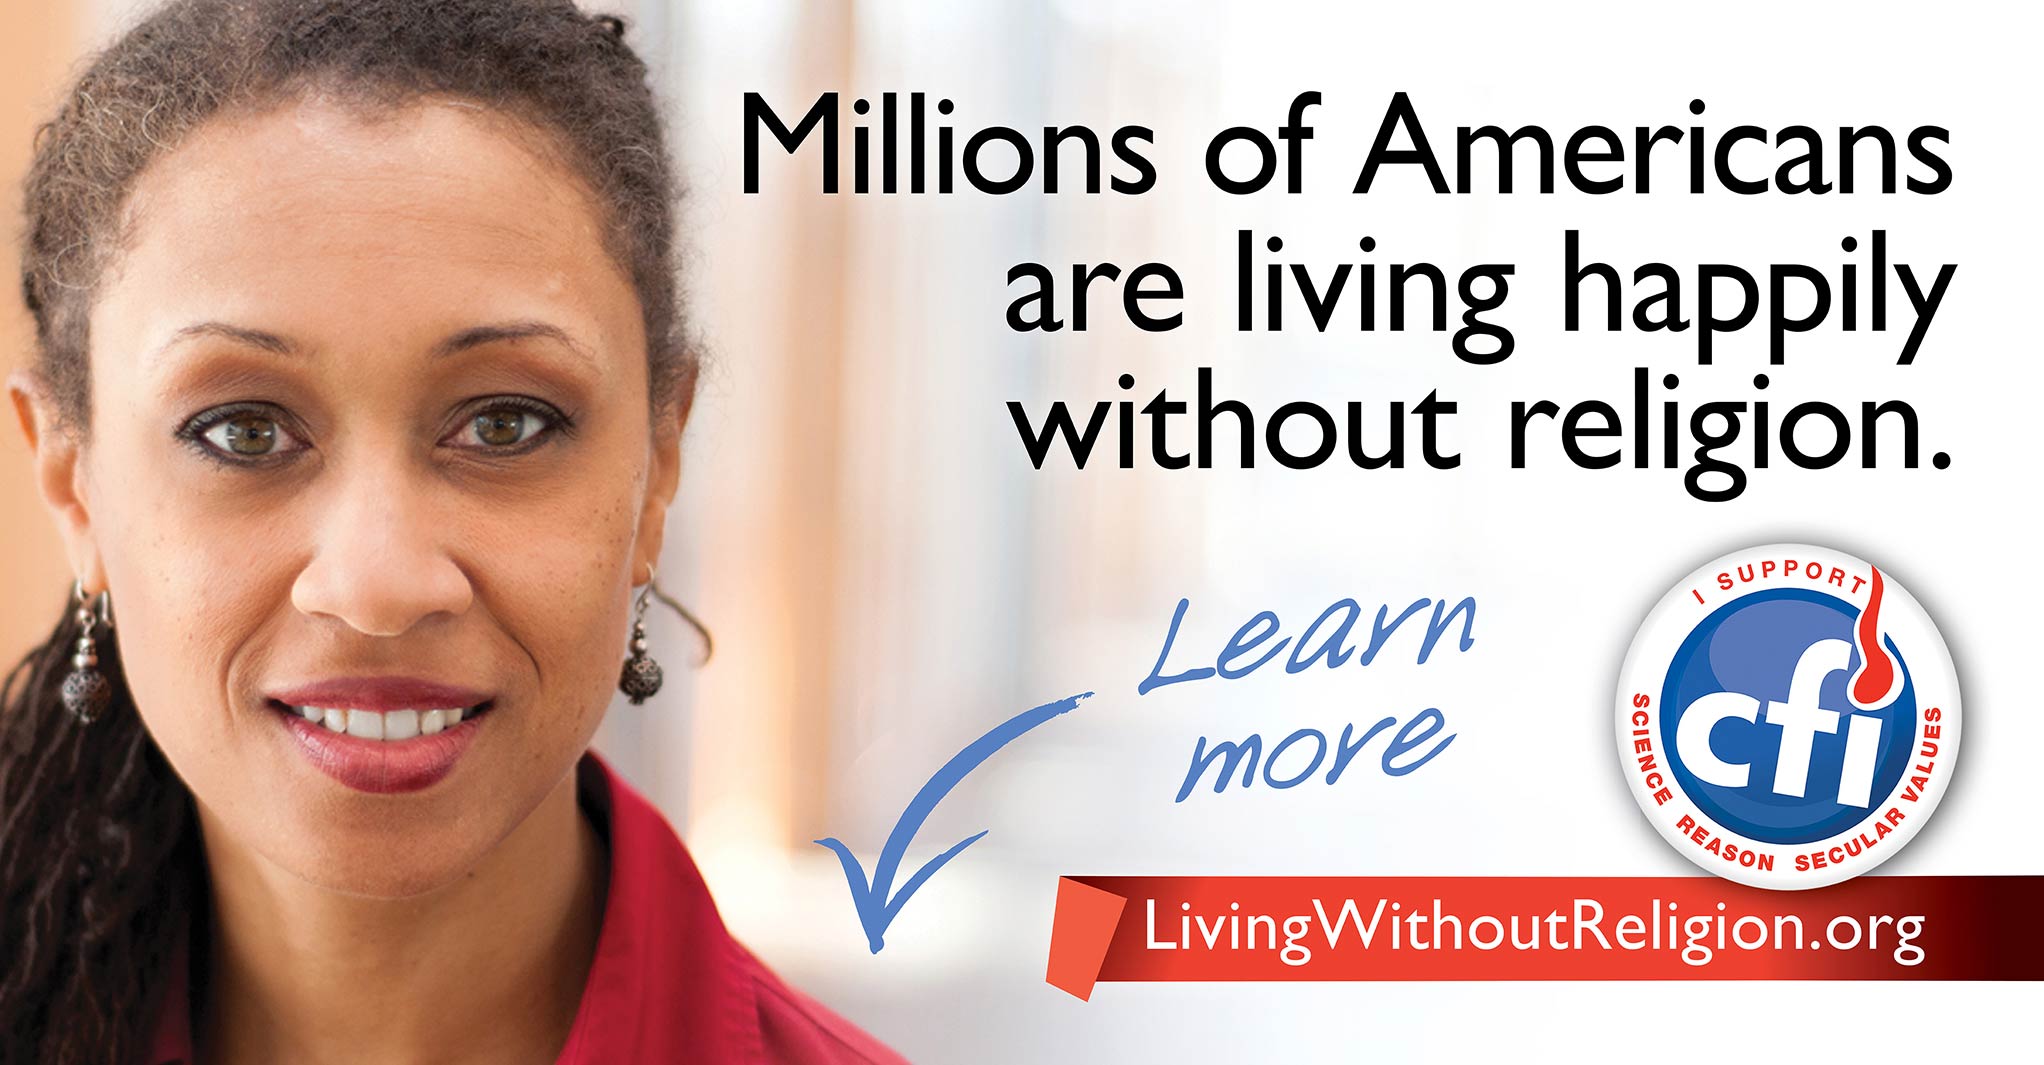 Millions of Americans are living happily without religion. CFI. LivingWithoutReligion.org. Learn more!